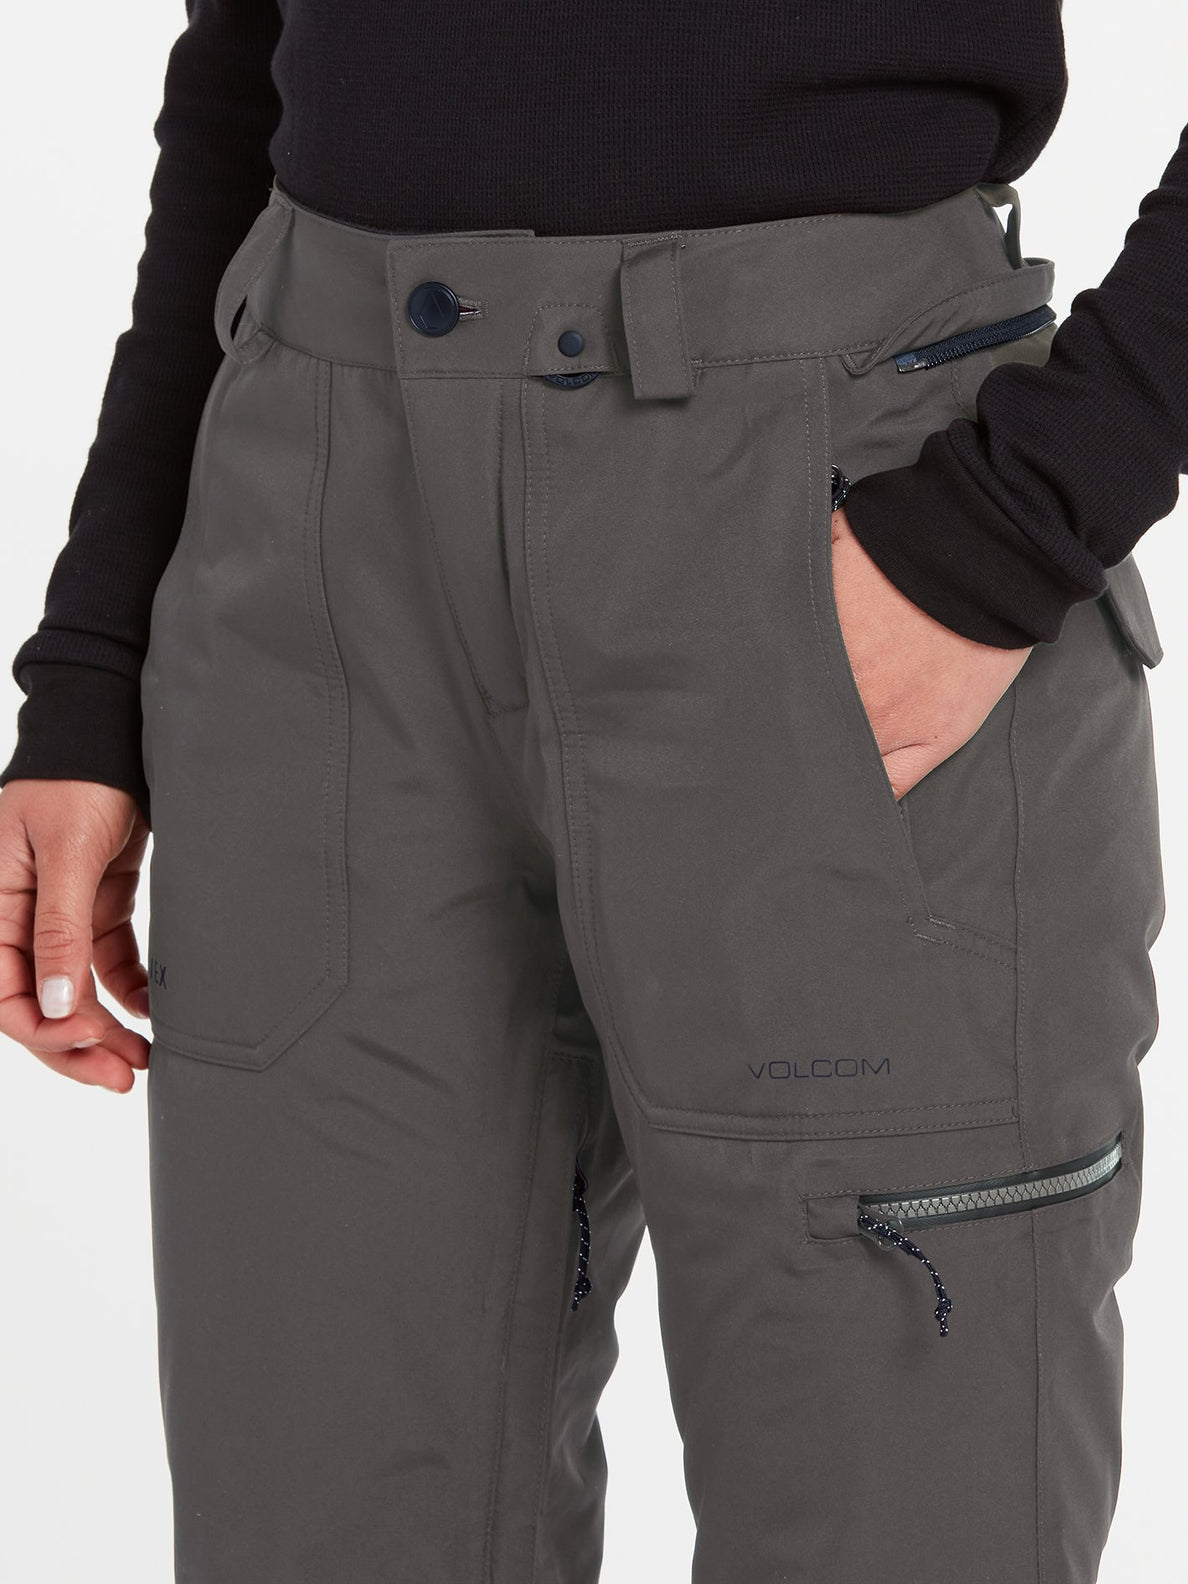 Knox Insulated Gore-Tex Trousers - DARK GREY (H1252200_DGR) [17]